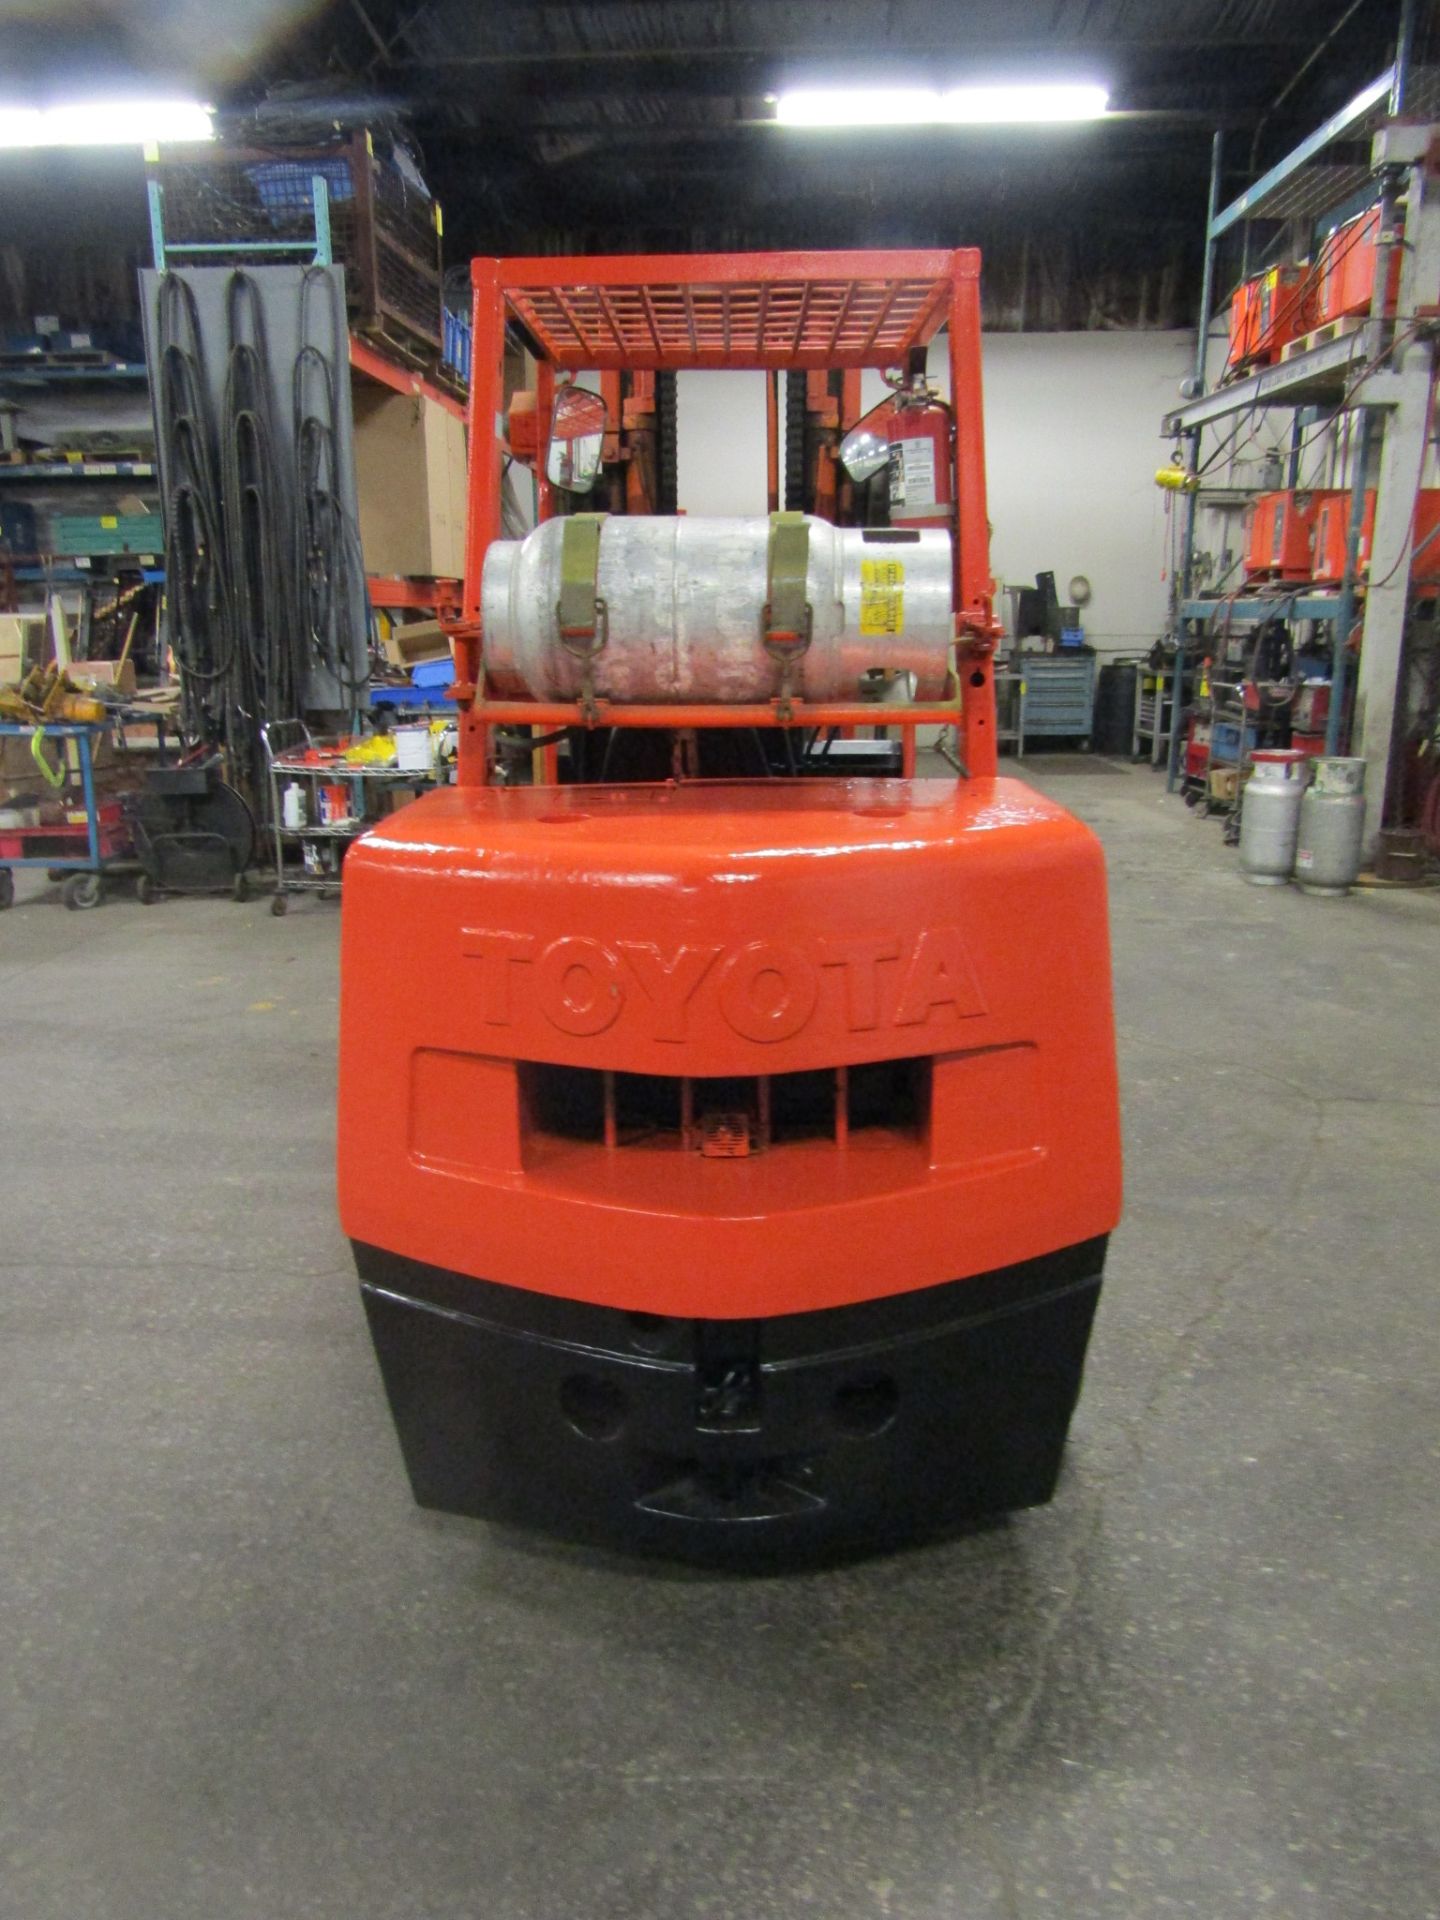 Toyota 10000lbs Capacity Forklift - LPG (propane) with 6' forks with 3-stage mast (no propane tank - Image 3 of 3